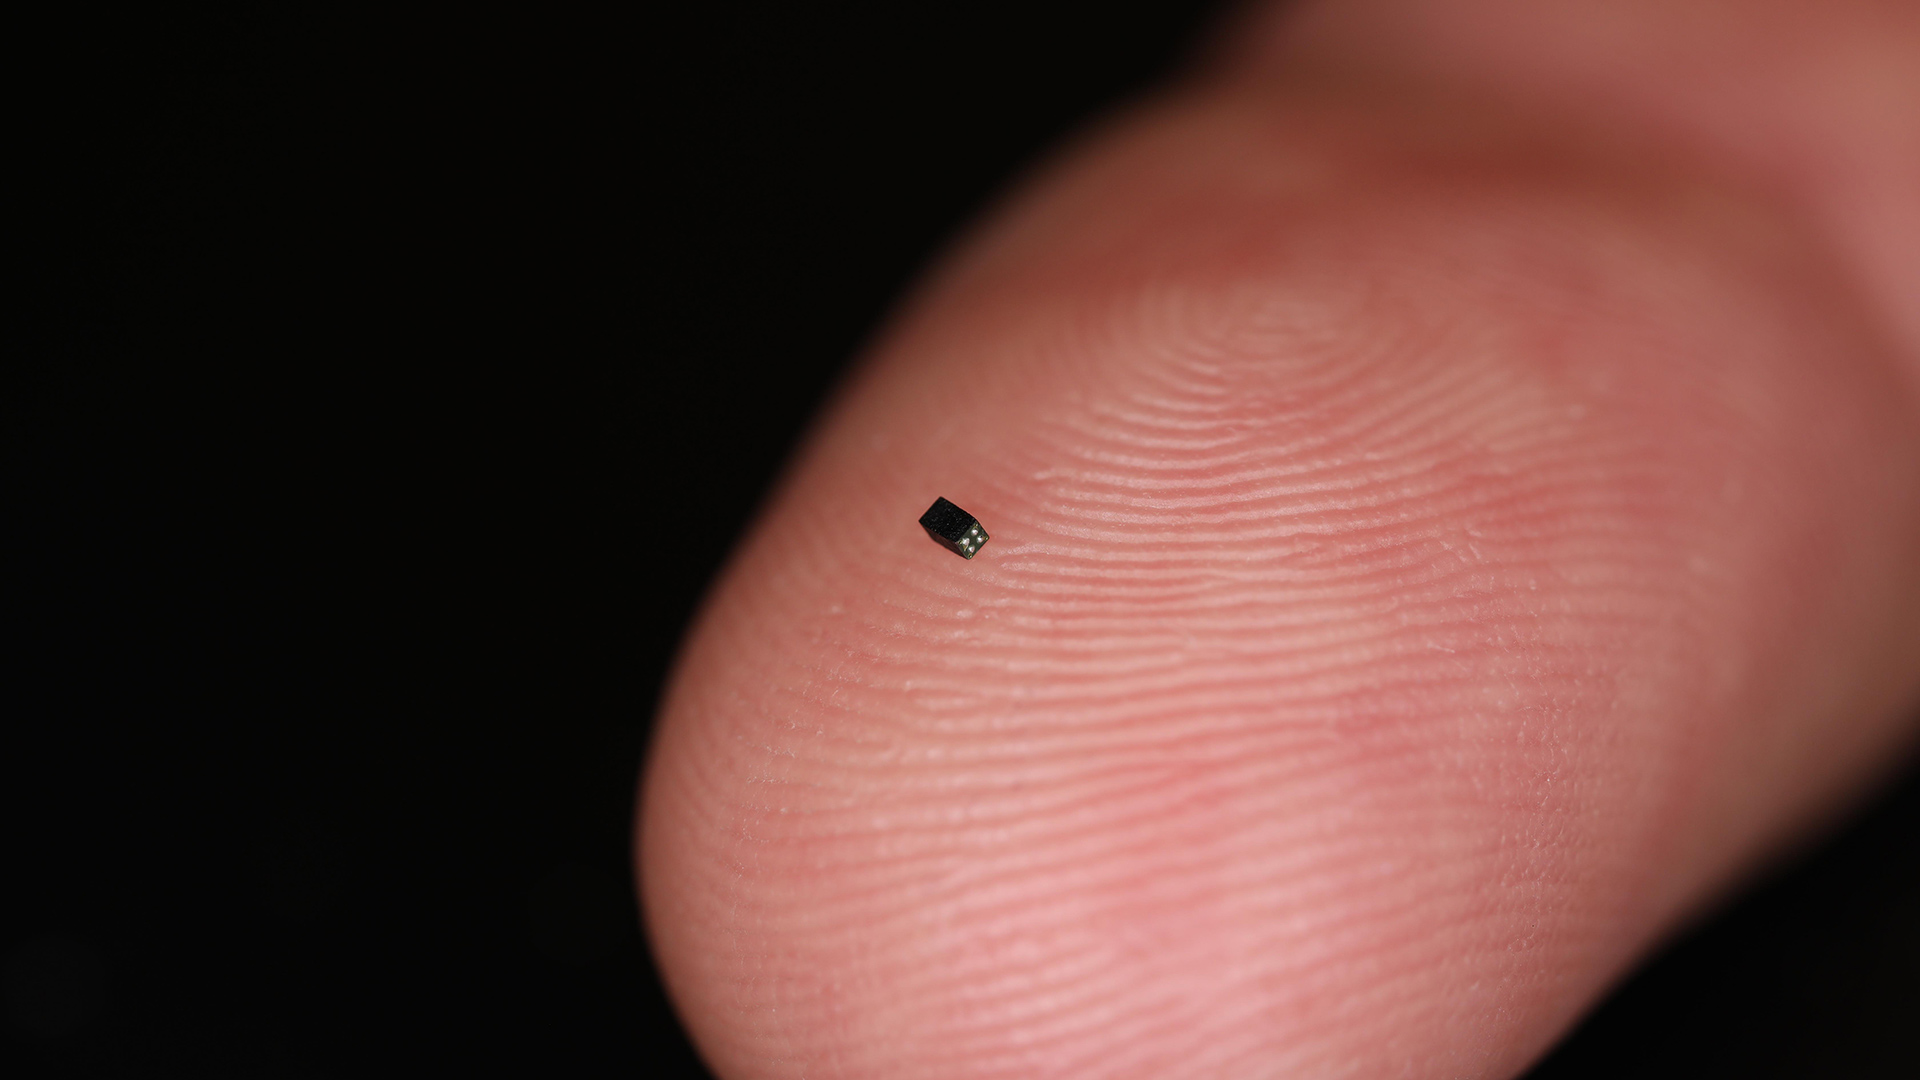 This is the world's smallest commercially available sensor, and it really  is tiny!